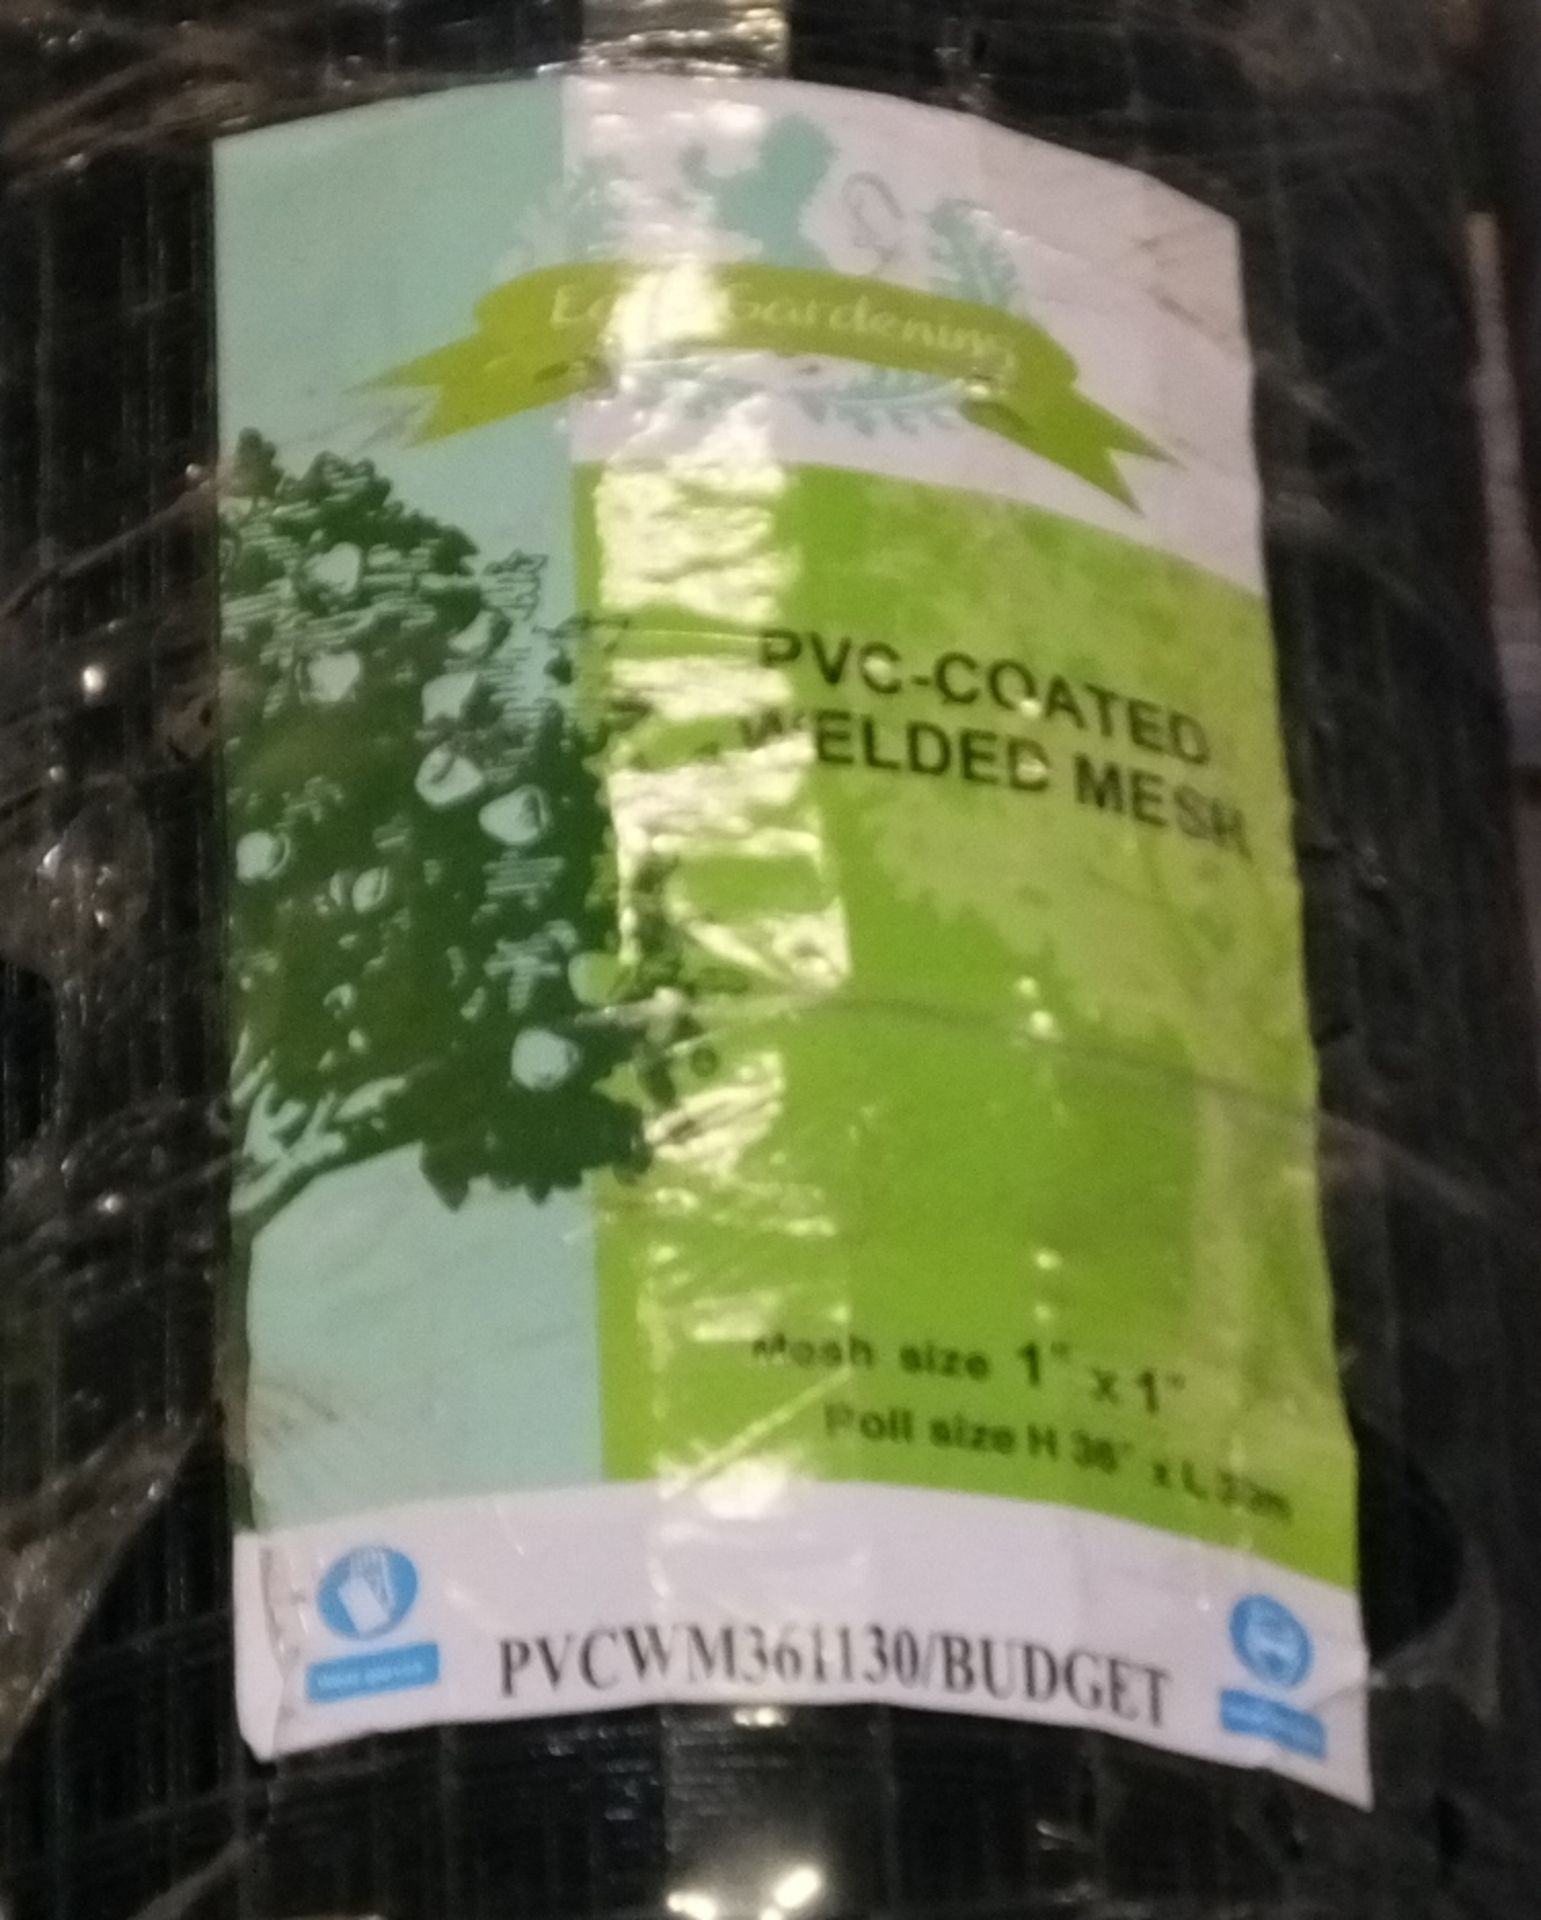 Easy Gardening PVC Coated Welded Mesh (Green) - 1" x 1" - 36" x 30M - Image 2 of 3